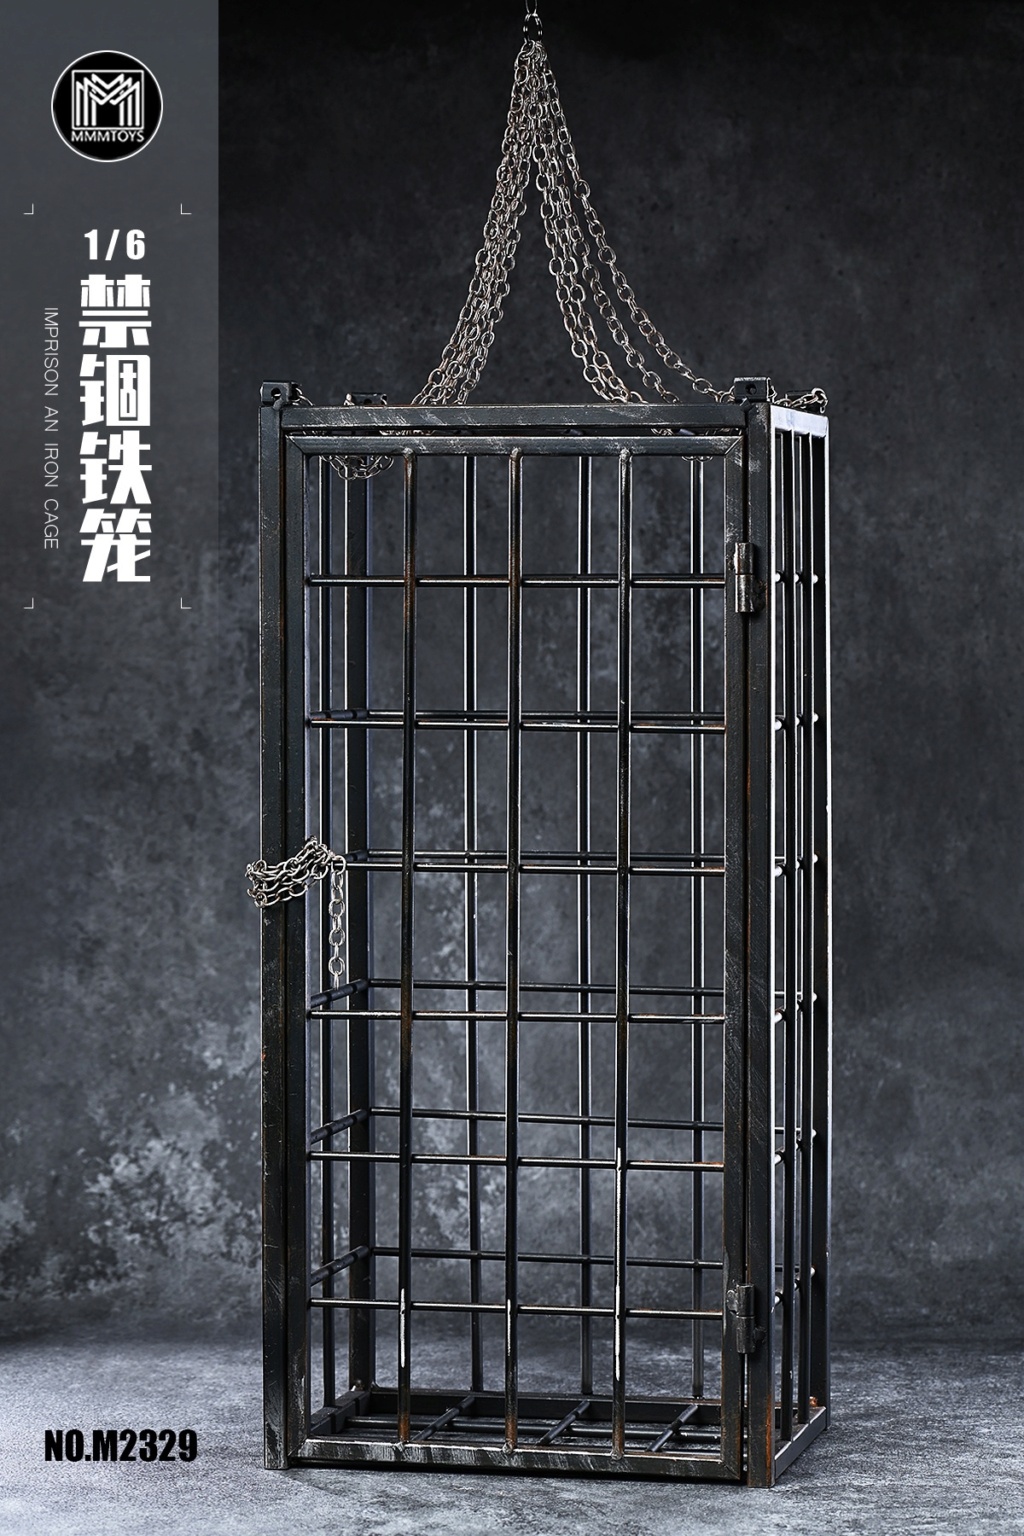 newproduct - NEW PRODUCT: MMMToys: 1/6 Imprisoned iron cage M2329  15304412